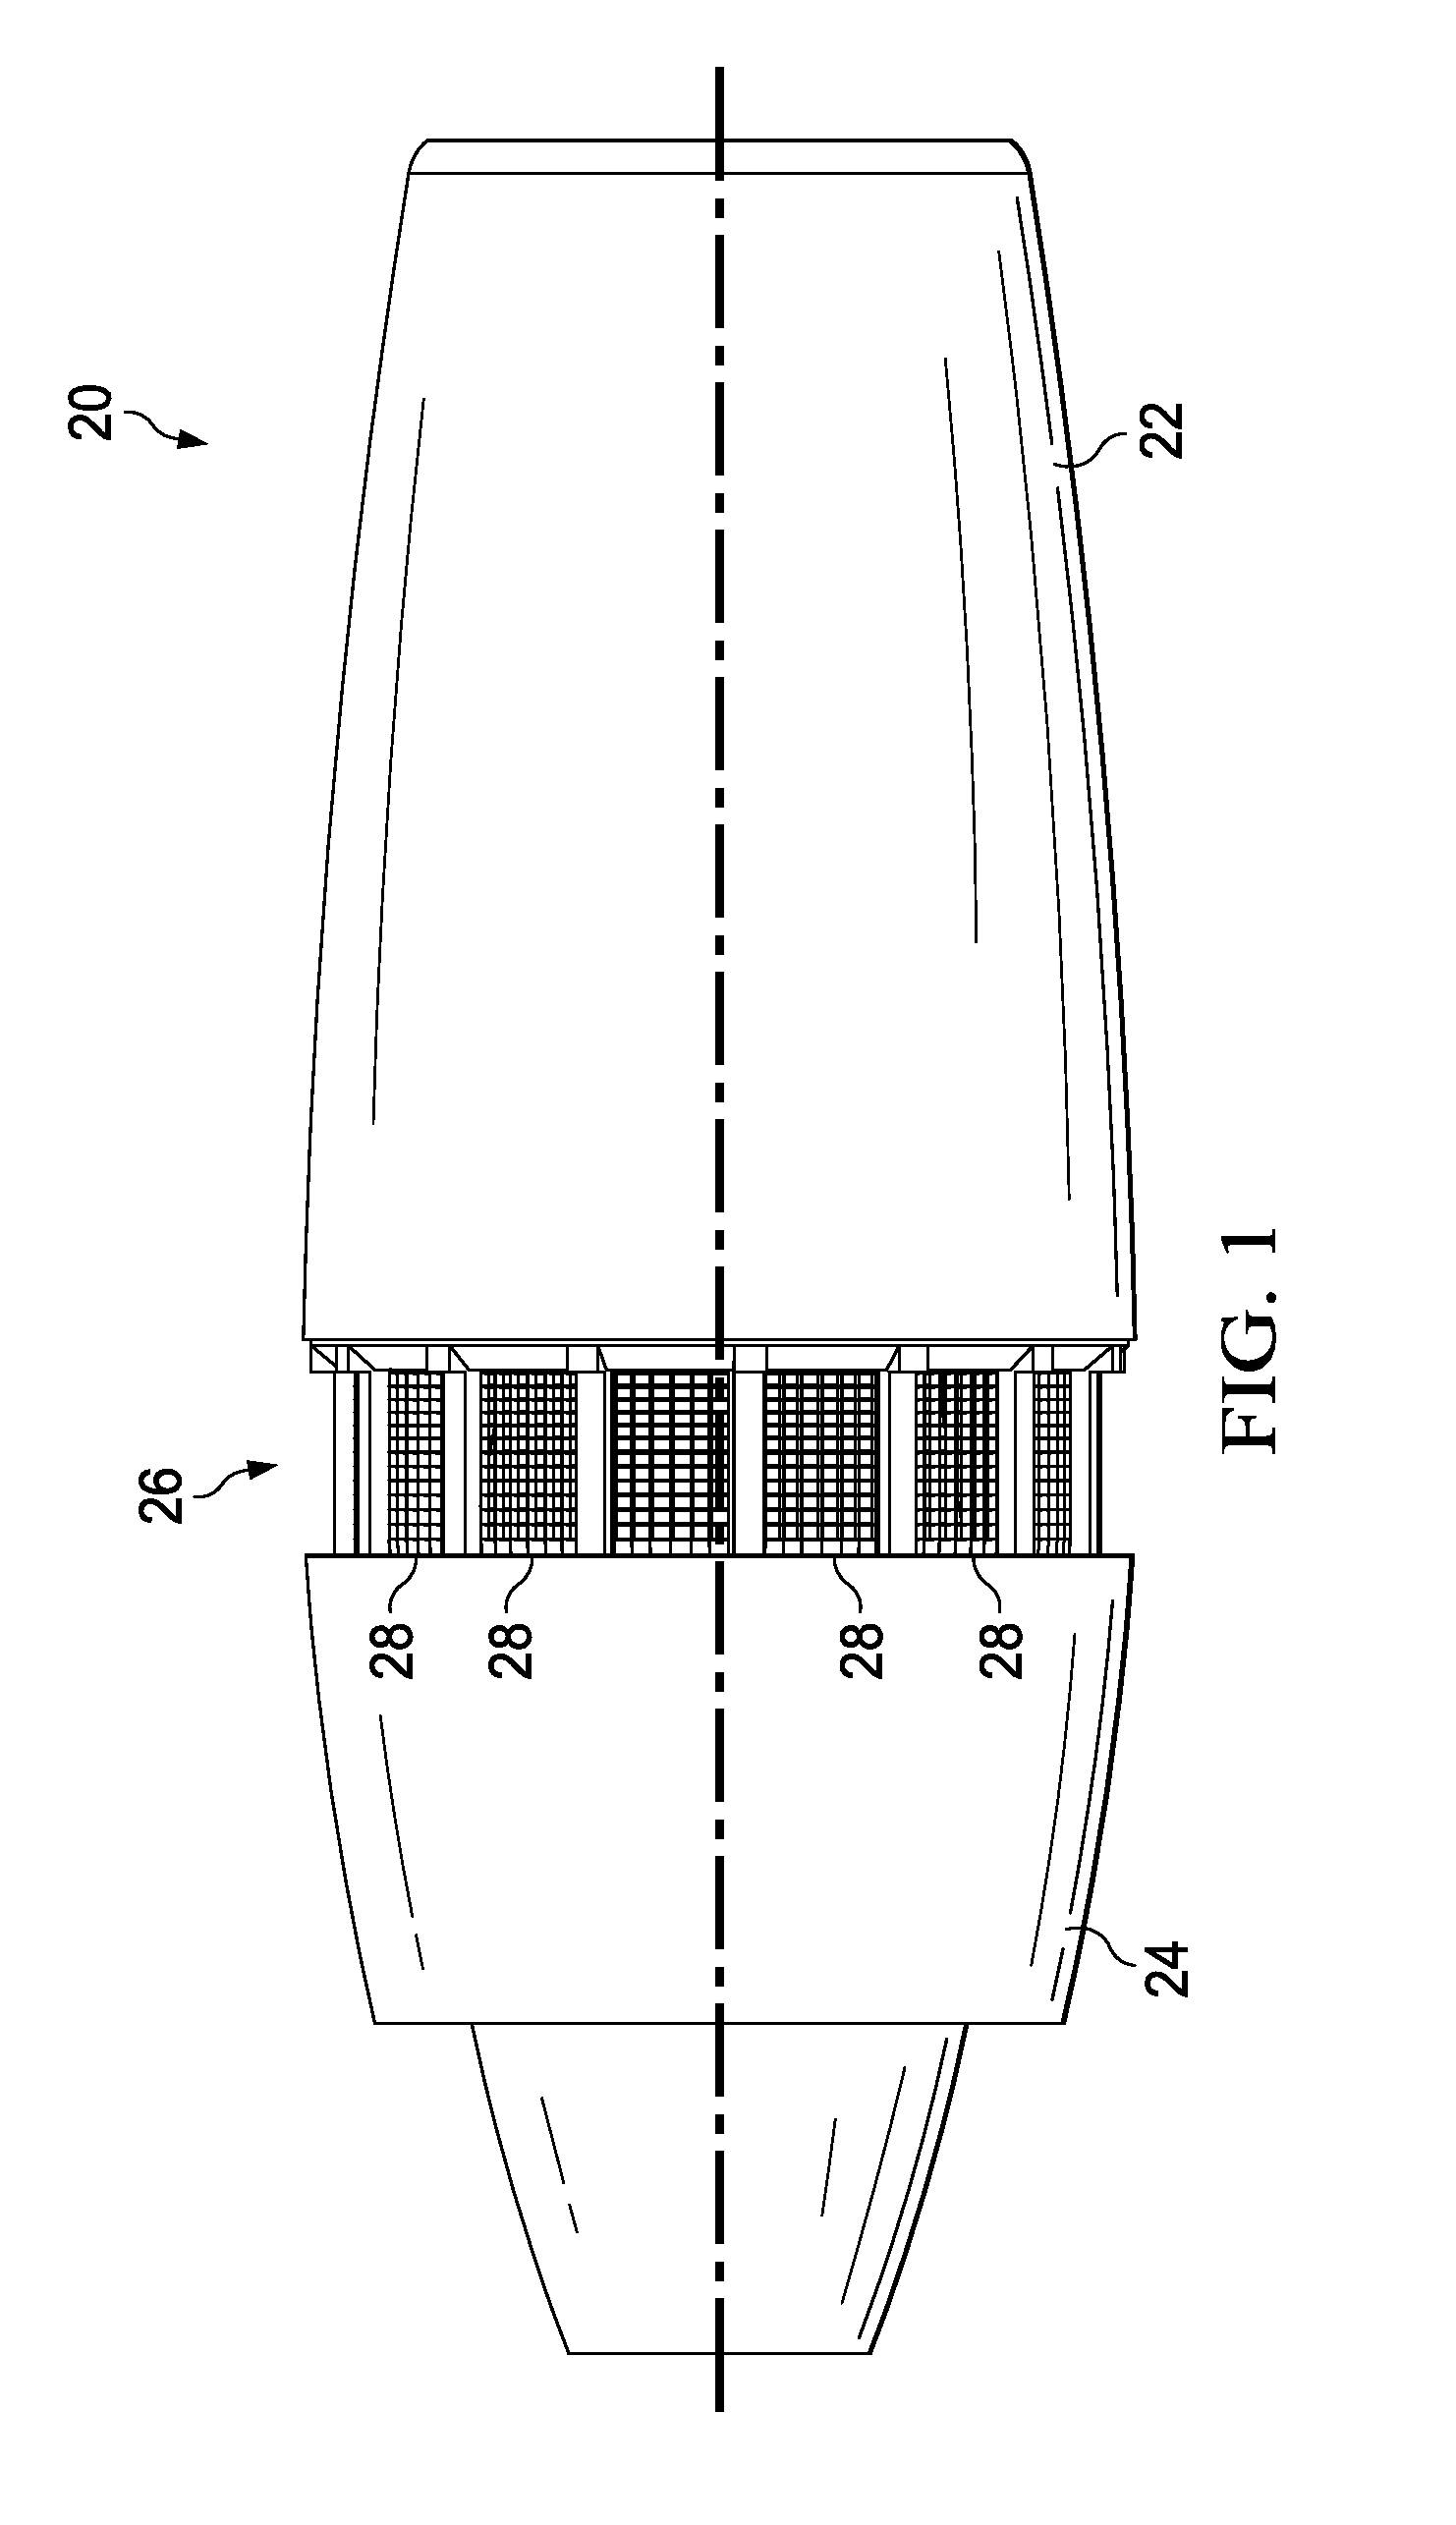 Thermoformed Cascades for Jet Engine Thrust Reversers